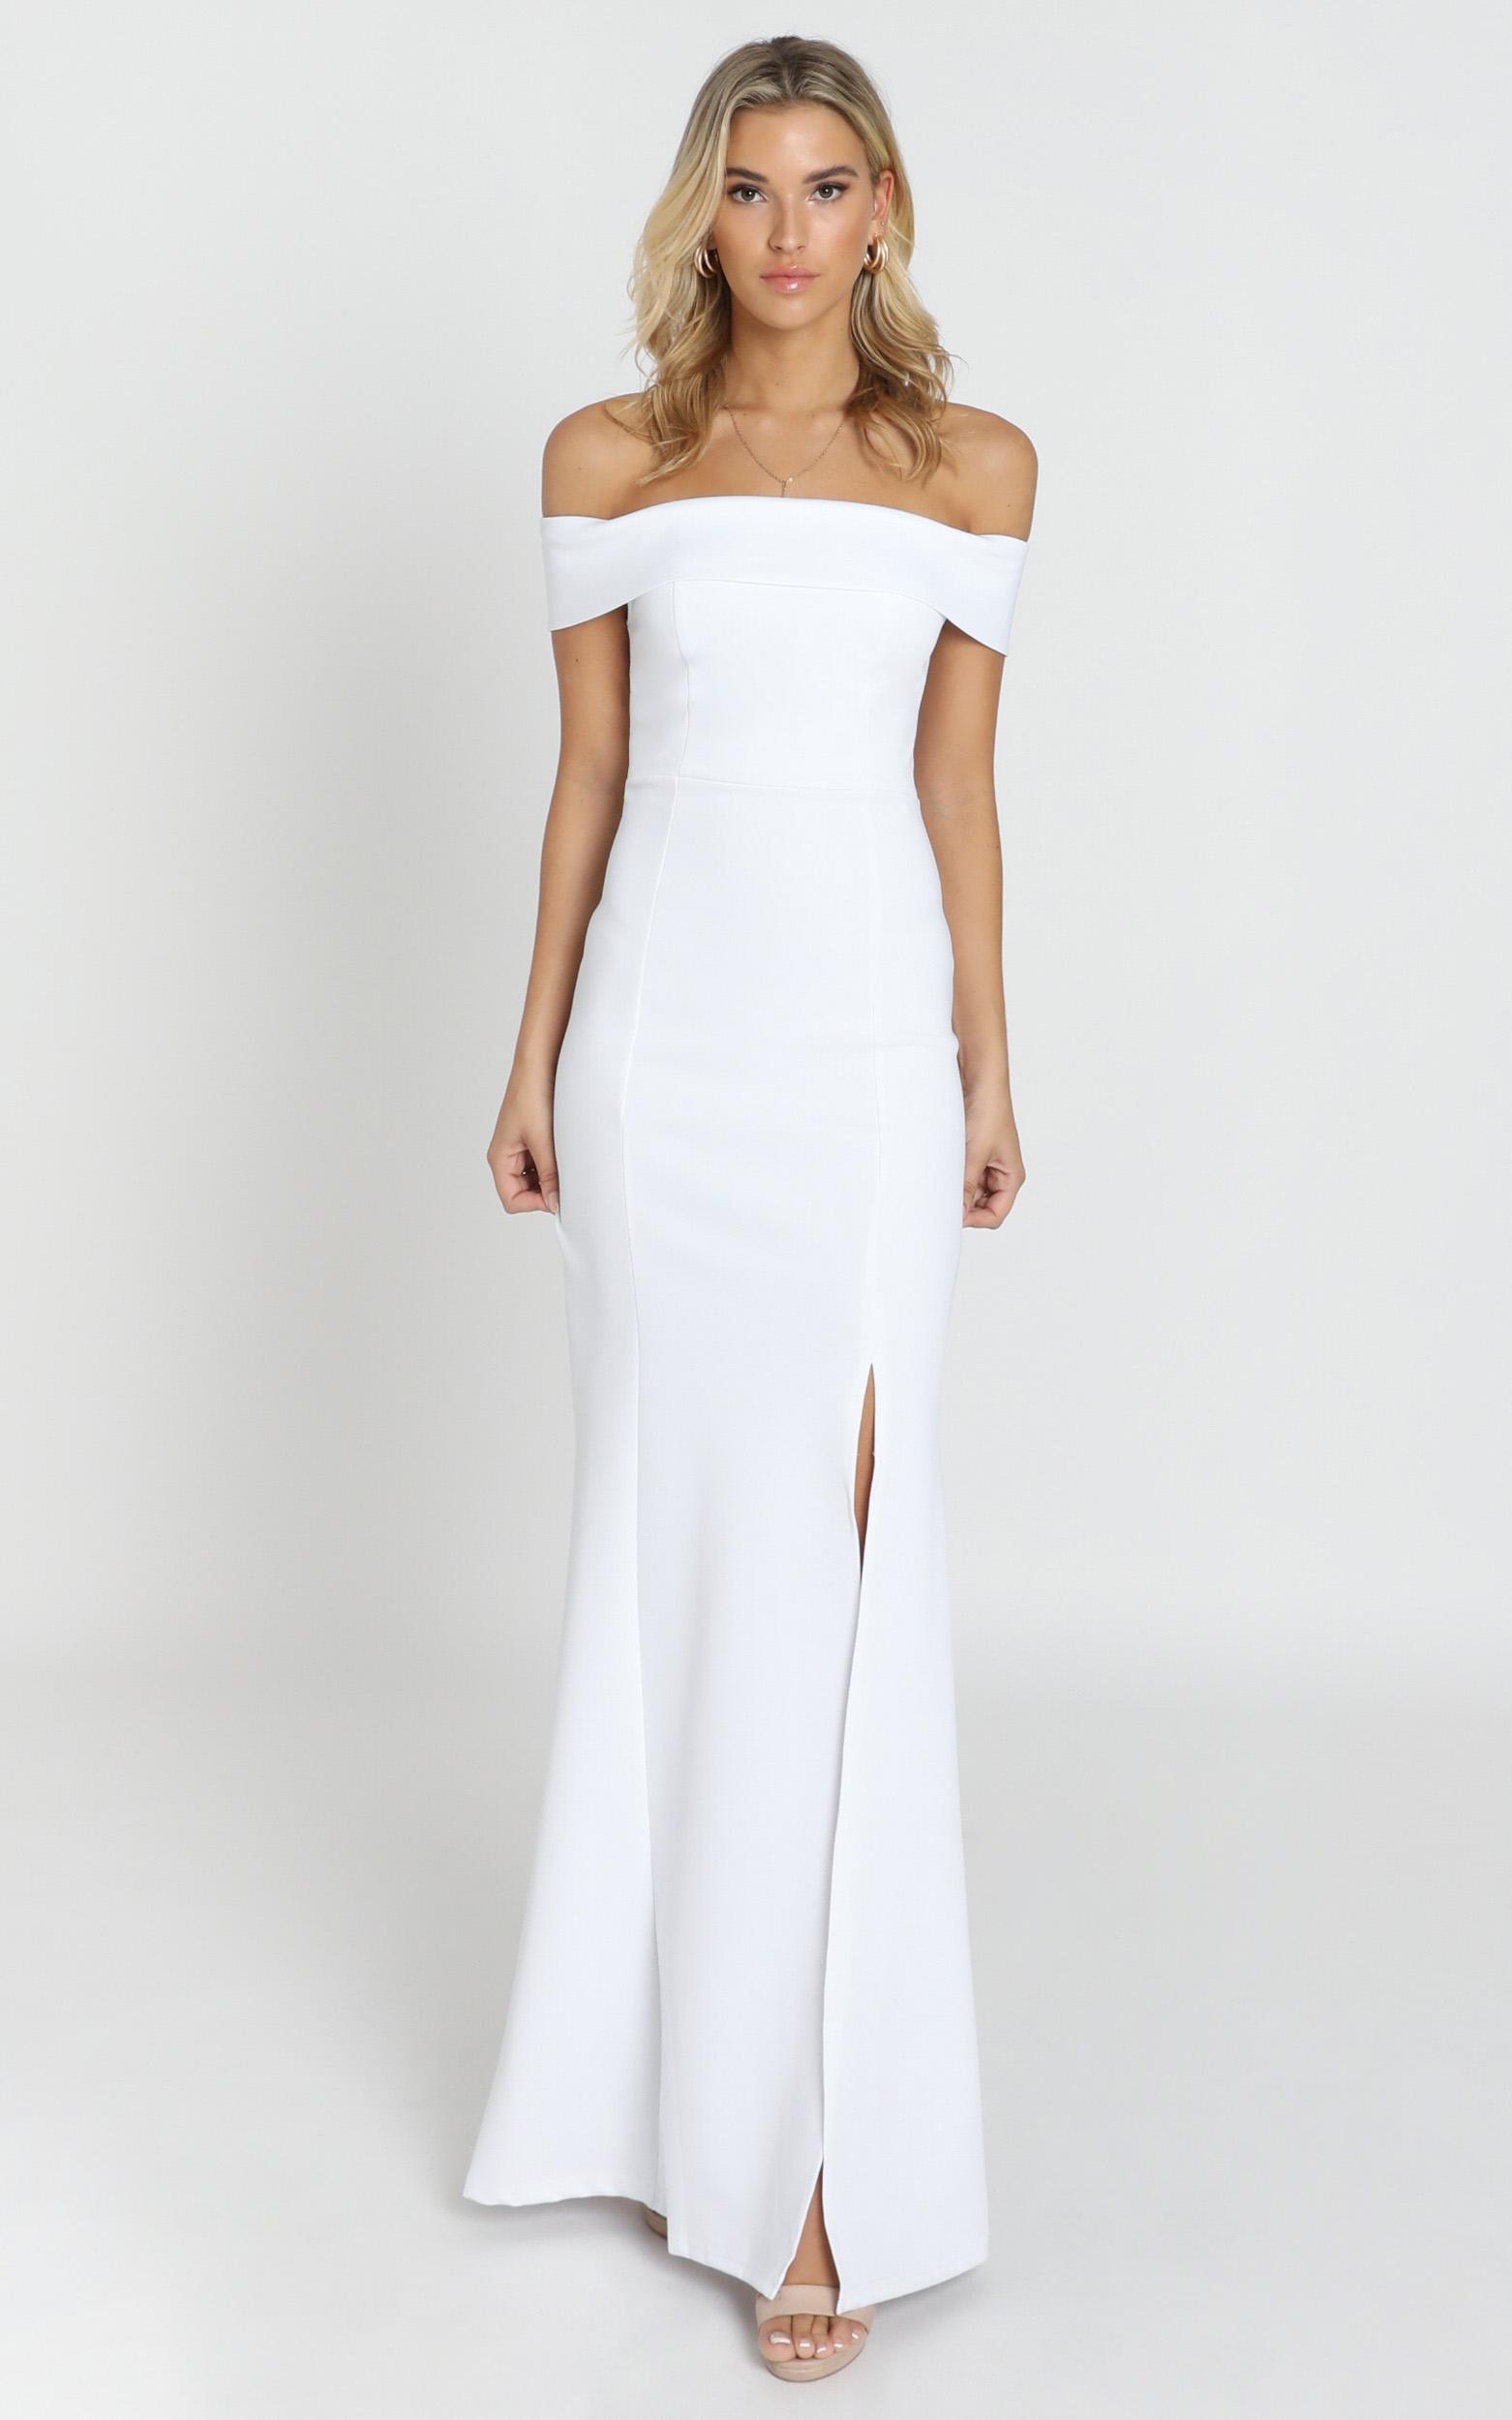 We Got This Feeling Dress in White - 06, WHT5, hi-res image number null